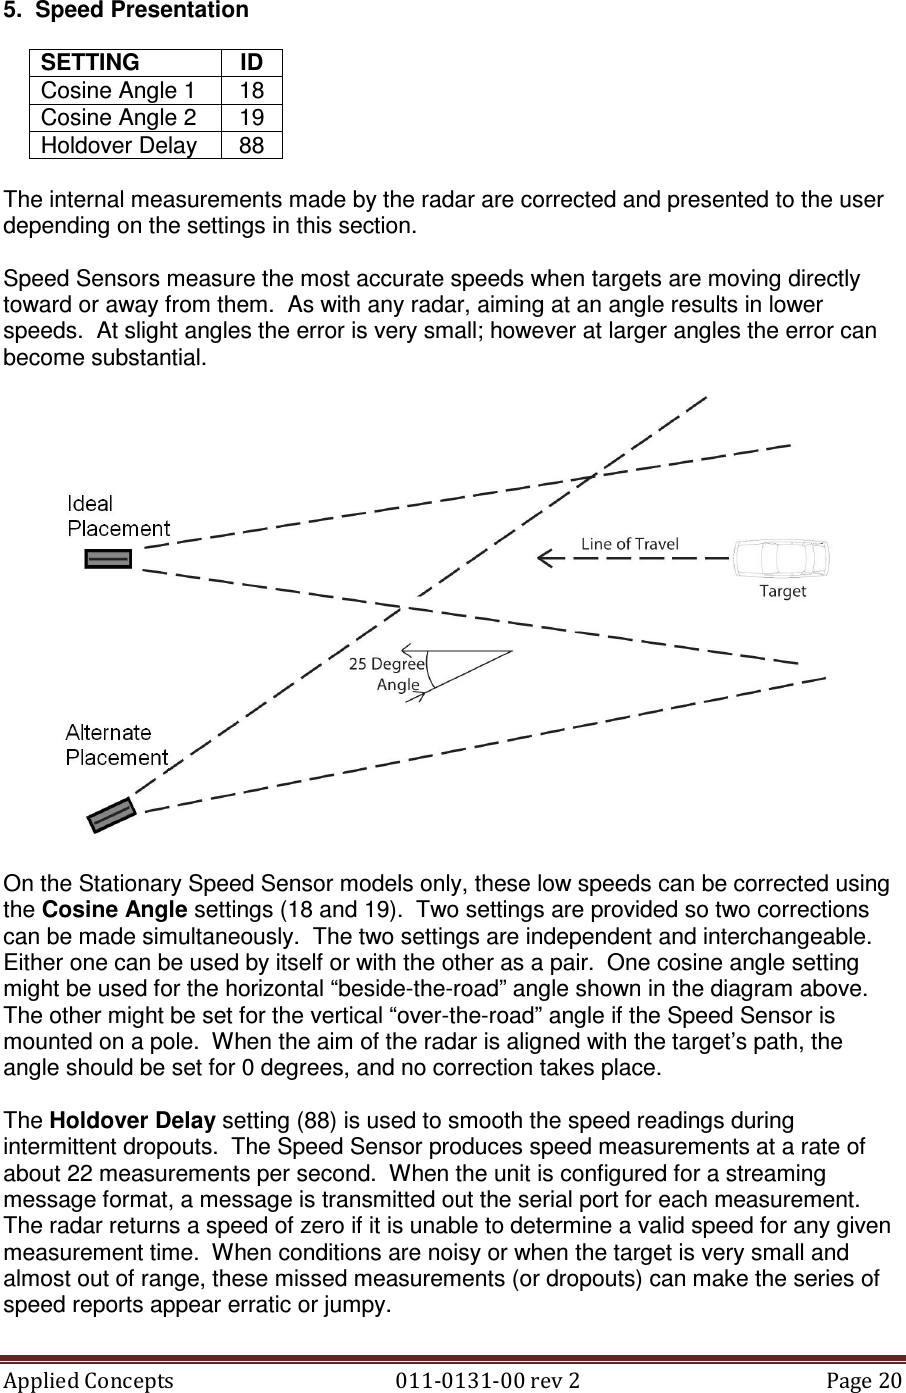 Applied Concepts                                            011-0131-00 rev 2  Page 20  5.  Speed Presentation  SETTING  ID Cosine Angle 1  18 Cosine Angle 2  19 Holdover Delay  88  The internal measurements made by the radar are corrected and presented to the user depending on the settings in this section.  Speed Sensors measure the most accurate speeds when targets are moving directly toward or away from them.  As with any radar, aiming at an angle results in lower speeds.  At slight angles the error is very small; however at larger angles the error can become substantial.    On the Stationary Speed Sensor models only, these low speeds can be corrected using the Cosine Angle settings (18 and 19).  Two settings are provided so two corrections can be made simultaneously.  The two settings are independent and interchangeable. Either one can be used by itself or with the other as a pair.  One cosine angle setting might be used for the horizontal “beside-the-road” angle shown in the diagram above.  The other might be set for the vertical “over-the-road” angle if the Speed Sensor is mounted on a pole.  When the aim of the radar is aligned with the target’s path, the angle should be set for 0 degrees, and no correction takes place.  The Holdover Delay setting (88) is used to smooth the speed readings during intermittent dropouts.  The Speed Sensor produces speed measurements at a rate of about 22 measurements per second.  When the unit is configured for a streaming message format, a message is transmitted out the serial port for each measurement.  The radar returns a speed of zero if it is unable to determine a valid speed for any given measurement time.  When conditions are noisy or when the target is very small and almost out of range, these missed measurements (or dropouts) can make the series of speed reports appear erratic or jumpy. 